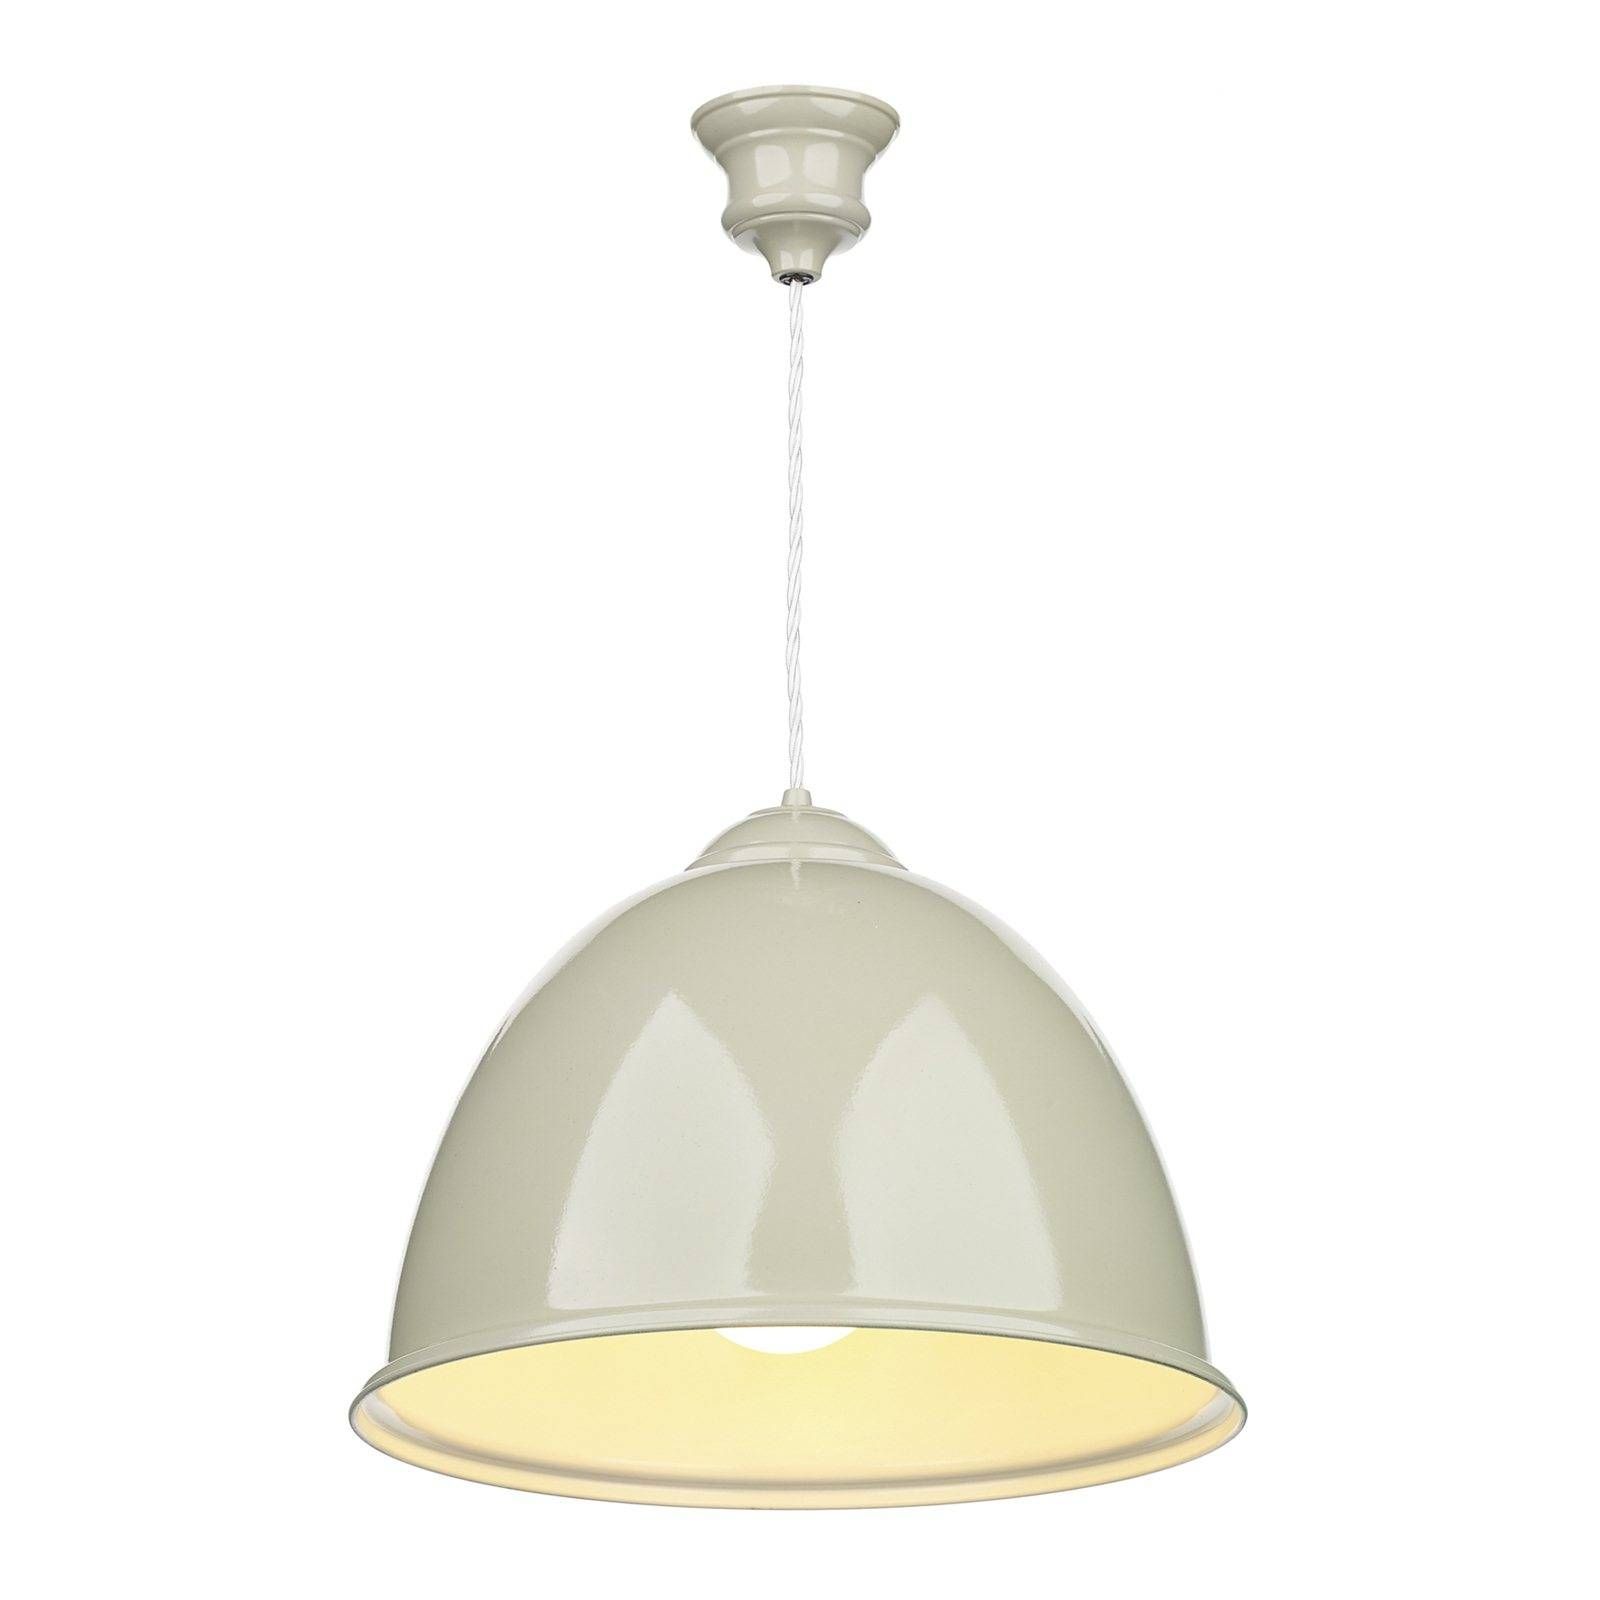 Hicks And Hicks Sennen Pendant Light French Cream – Hicks & Hicks Within French Style Ceiling Lights (View 11 of 15)